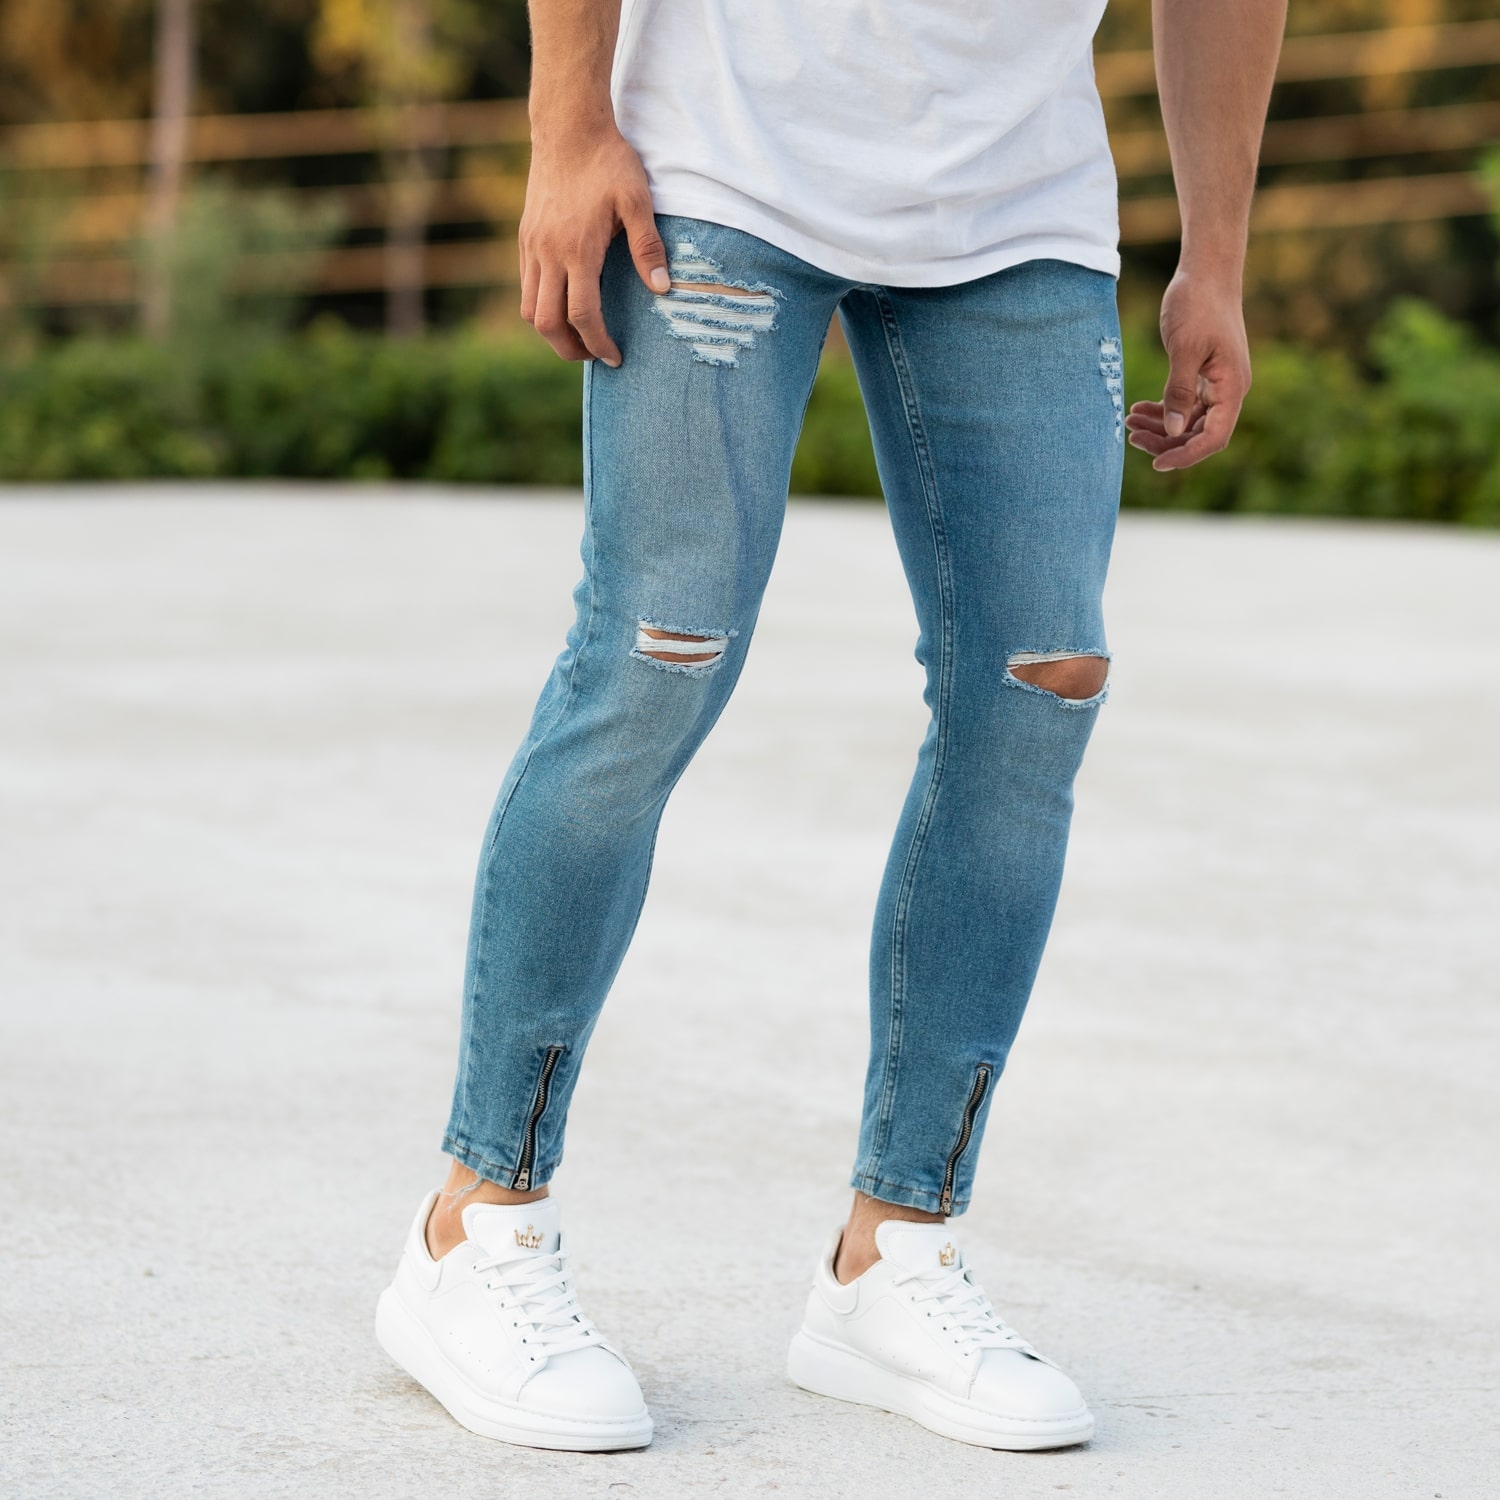 Men's Blue Ripped&Zipped Jeans